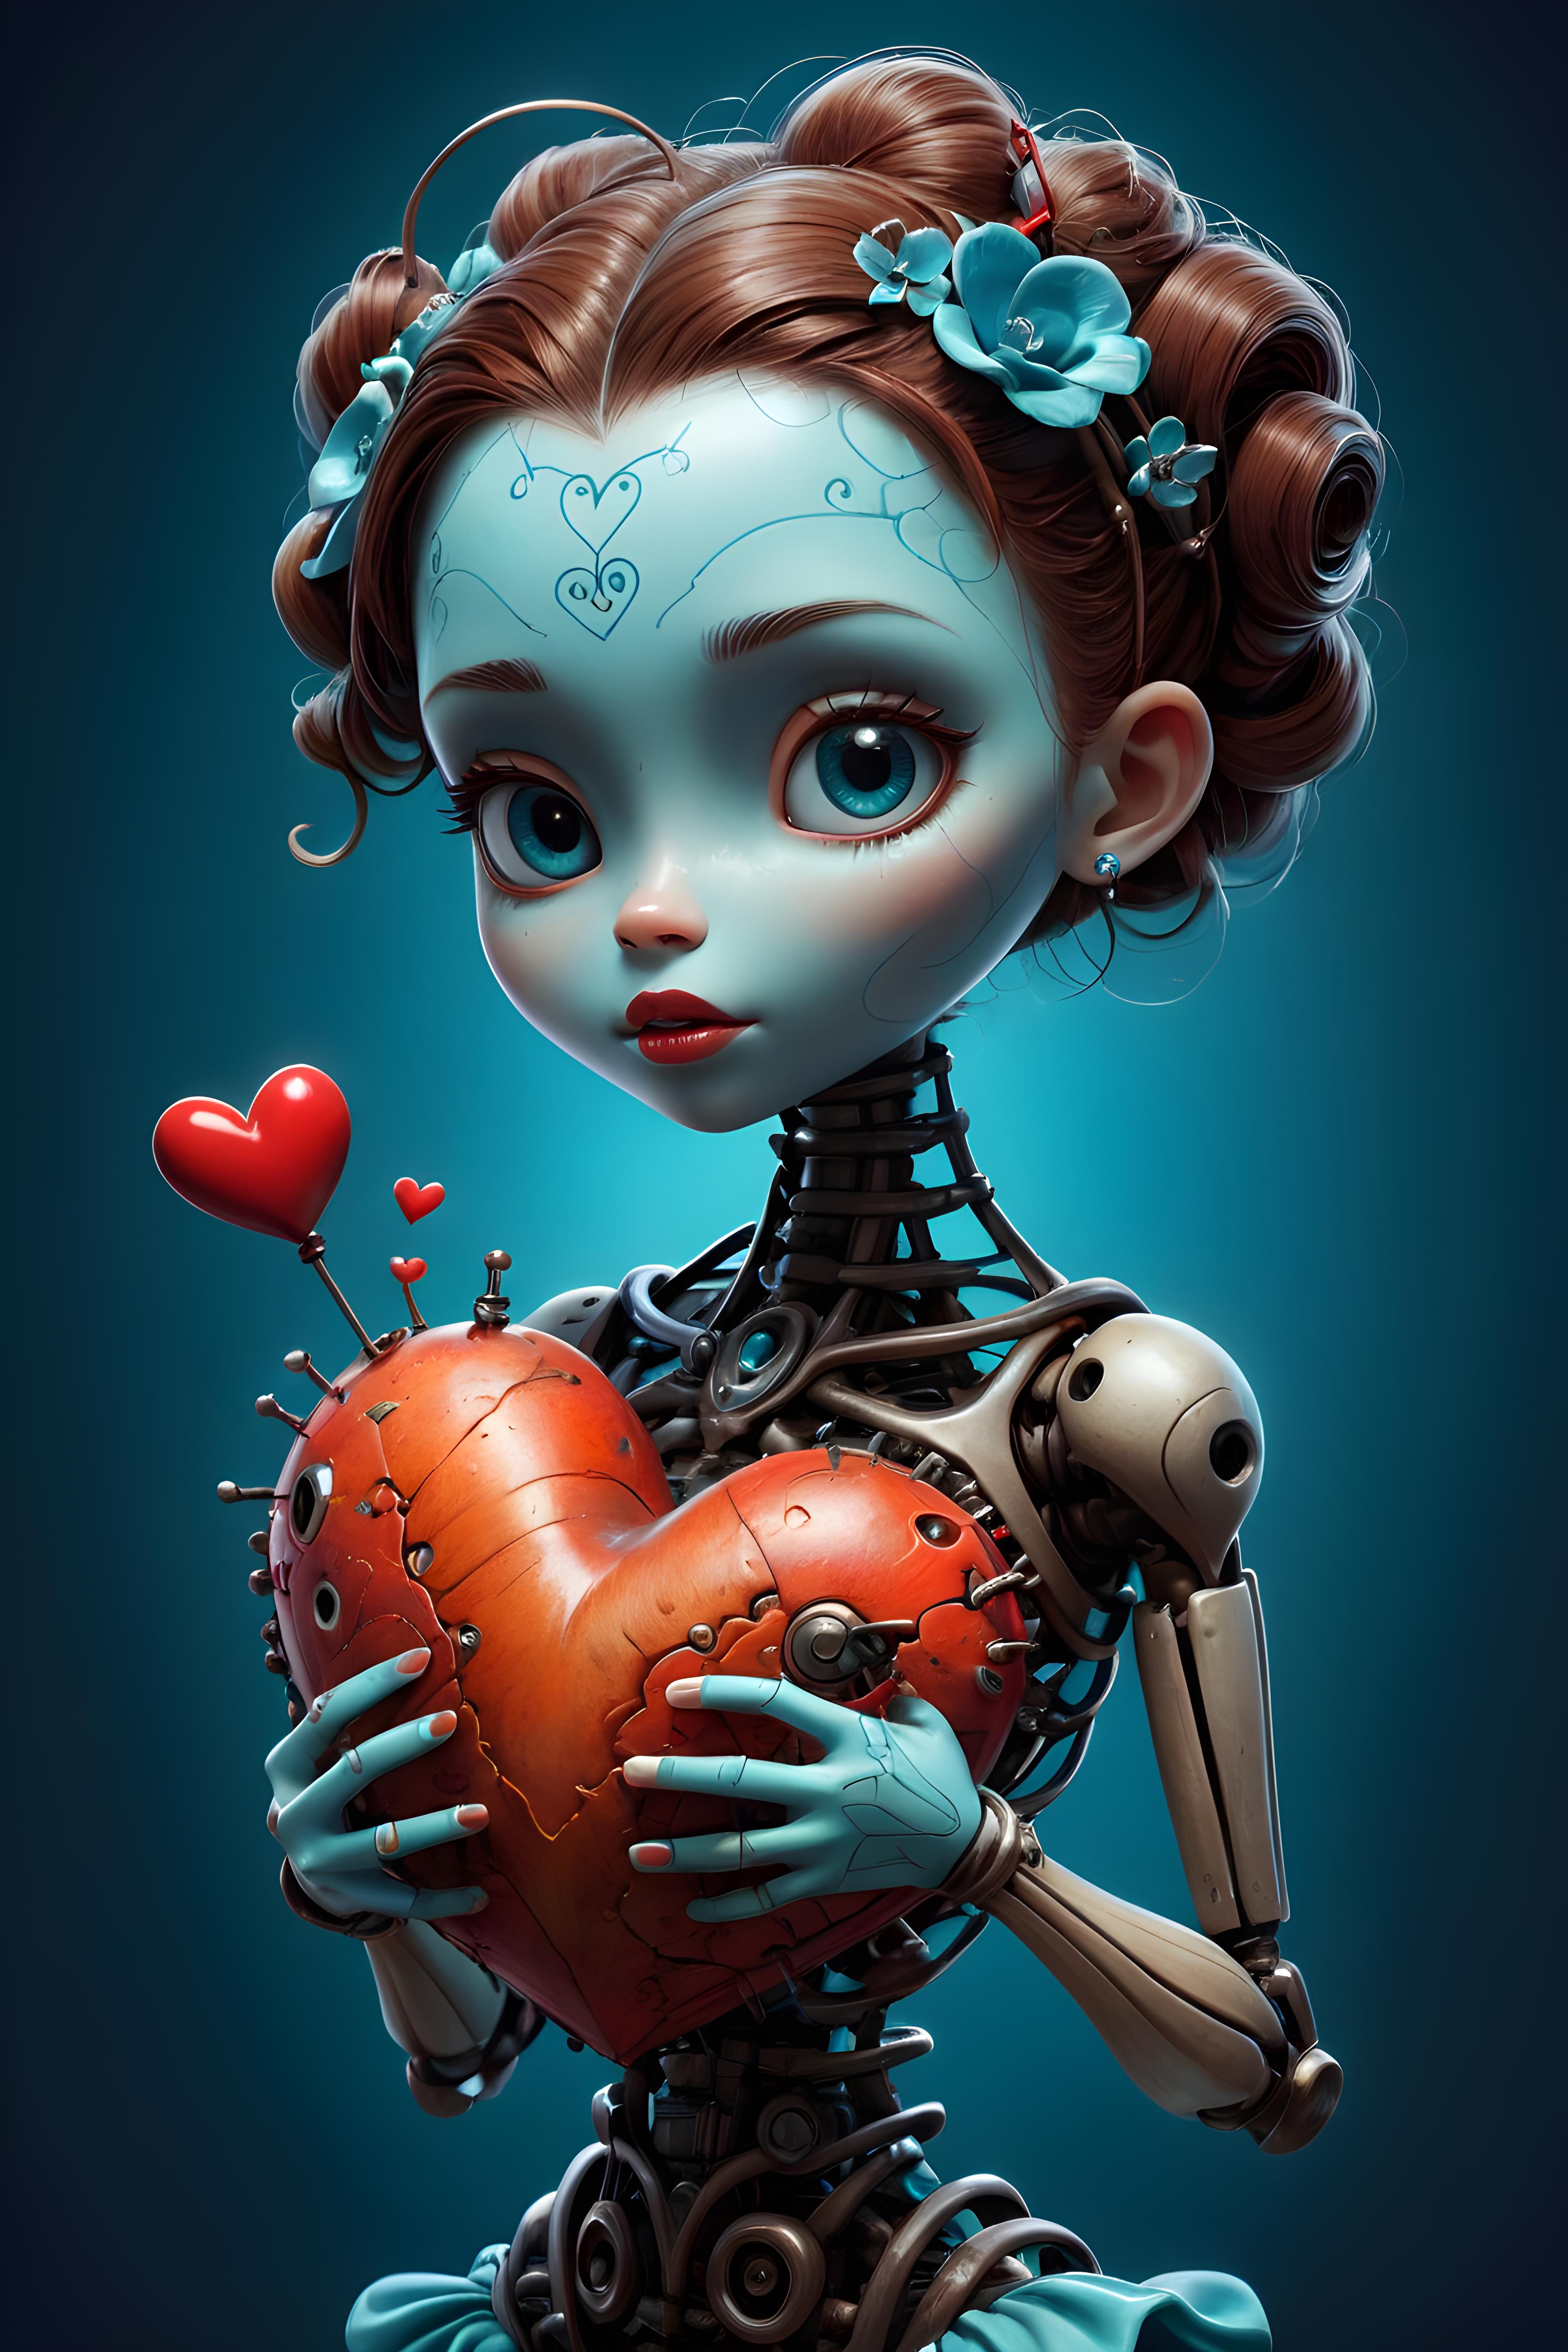 A beautifully crafted illustration of a blue-skinned robot girl holding a heart.